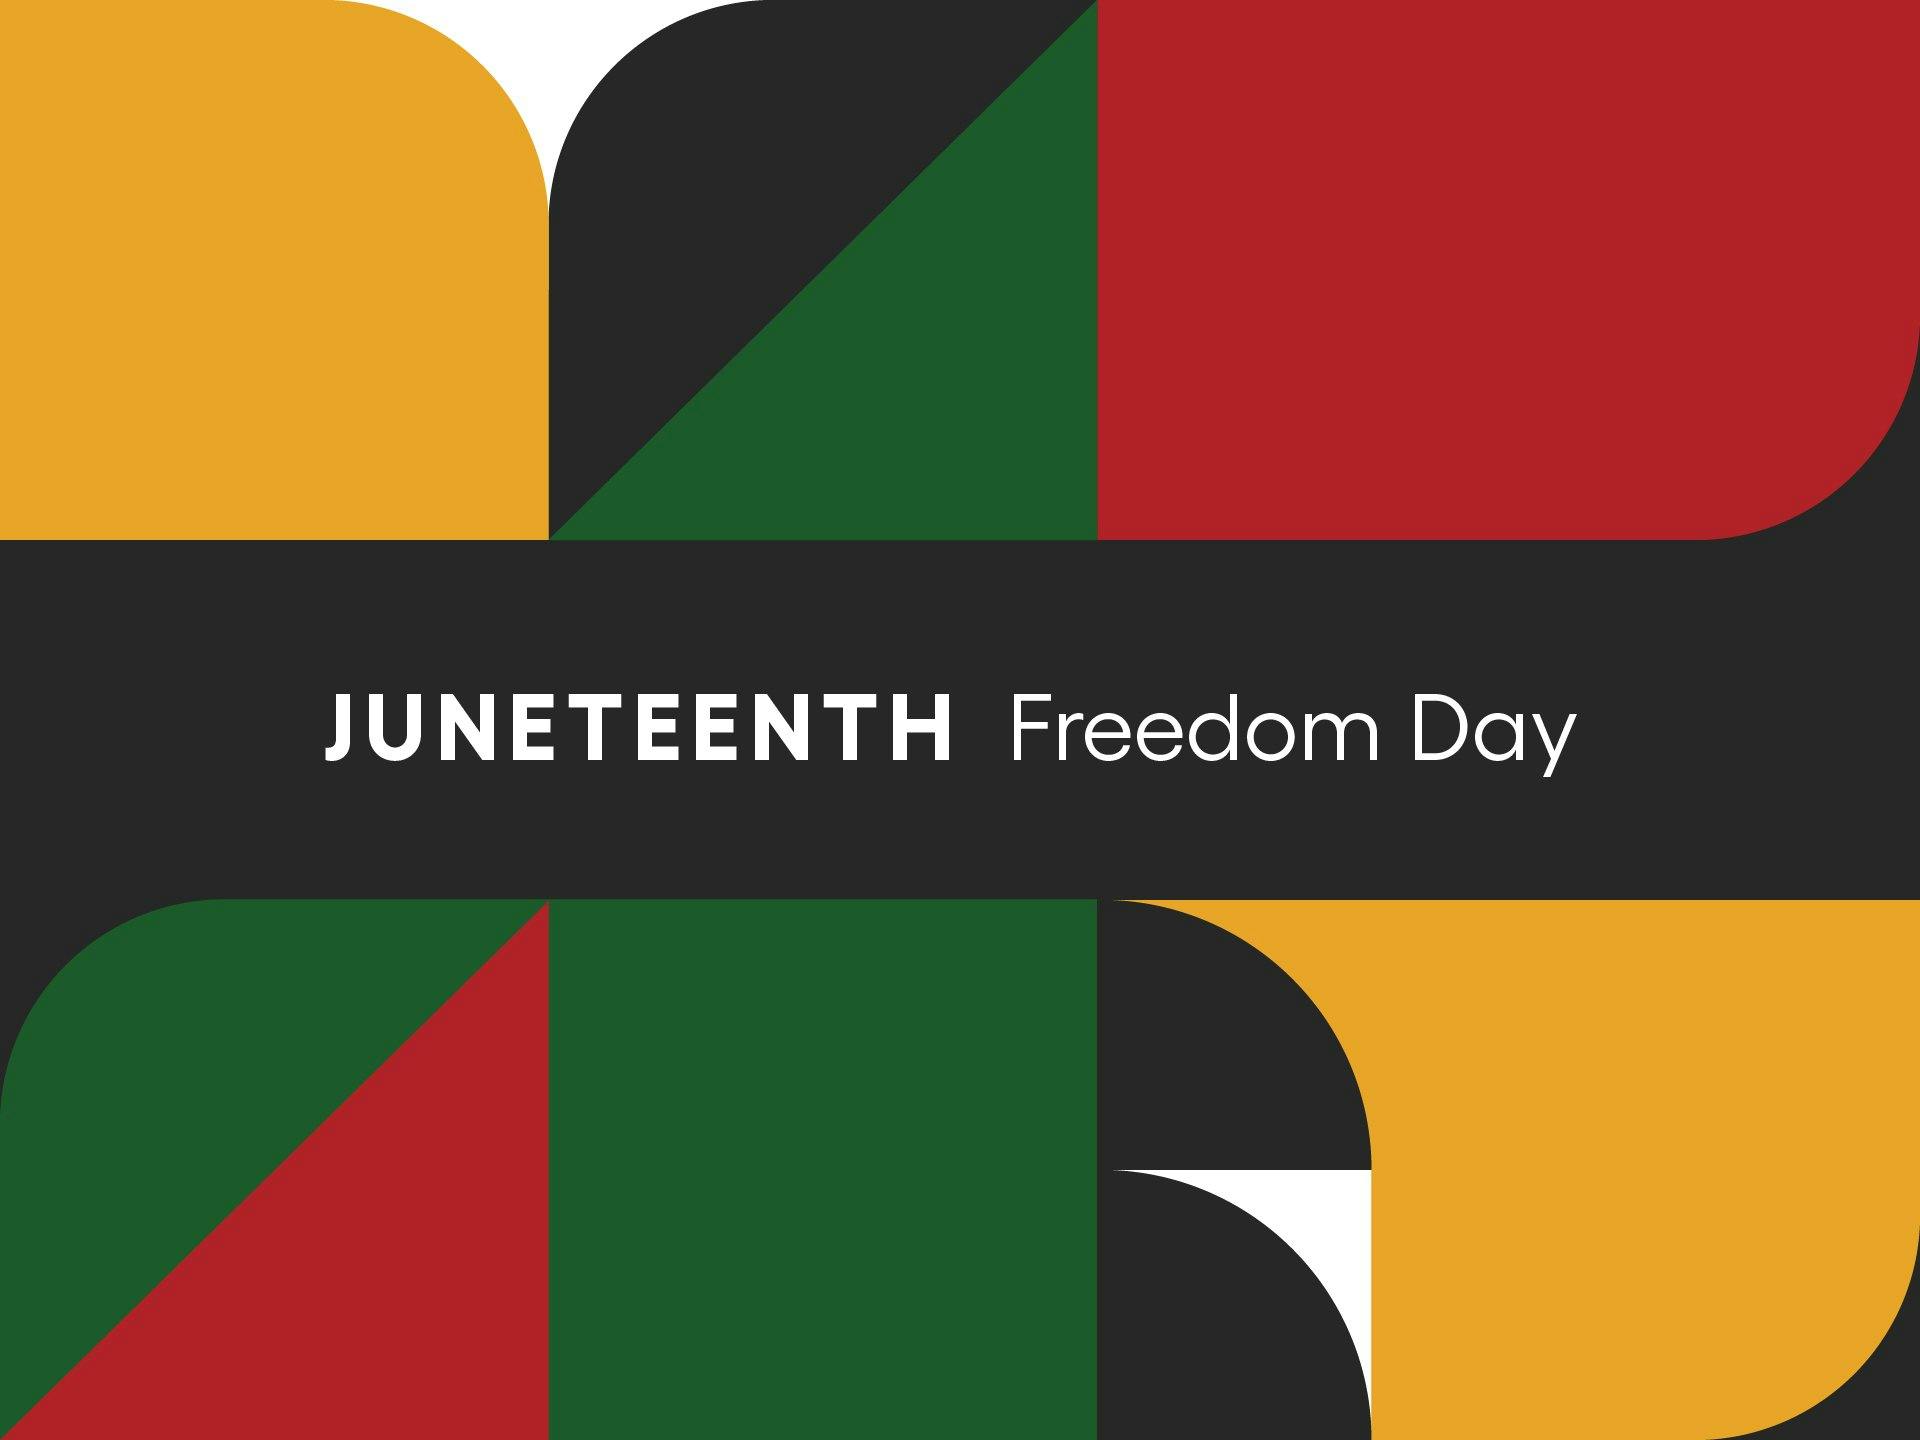 The words Juneteenth, and Freedom Day over a pan-African colored mosaic